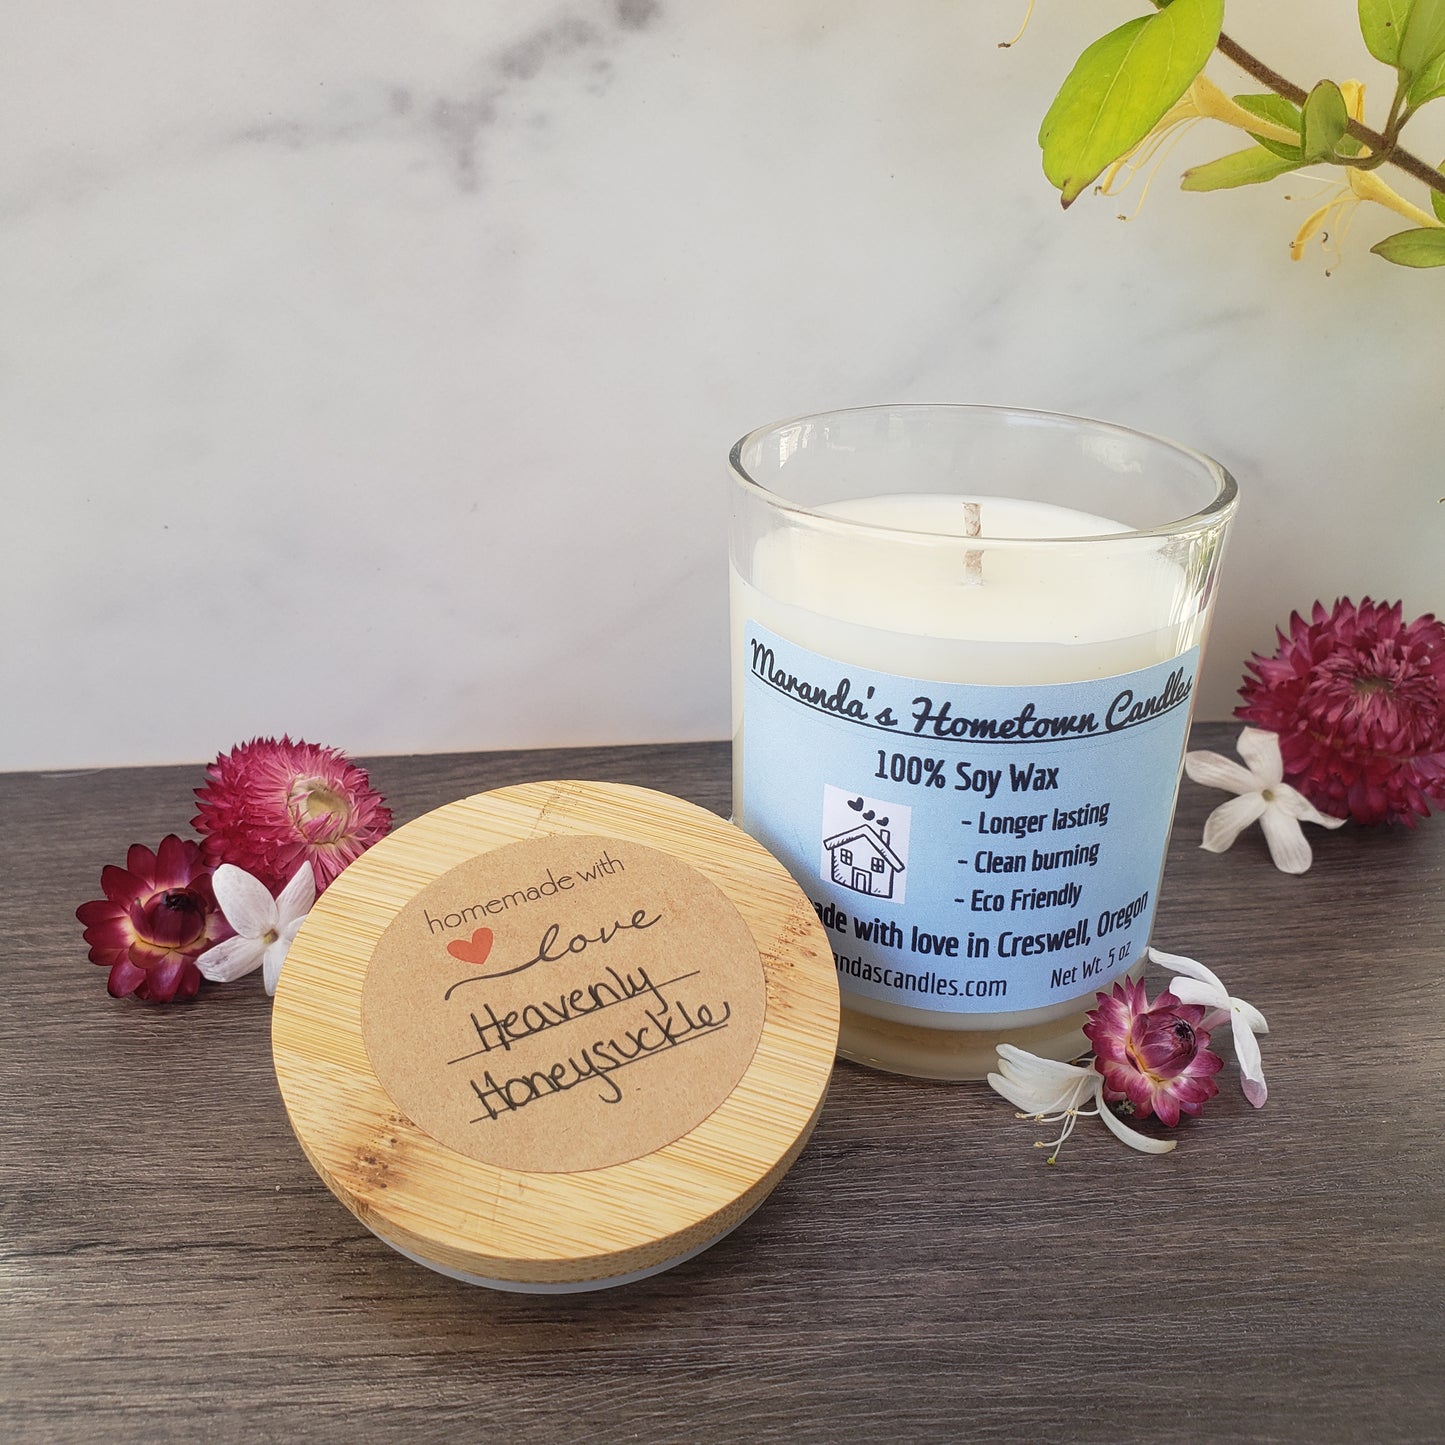 Heavenly Honeysuckle Scented Soy Wax Candles and Wax melts